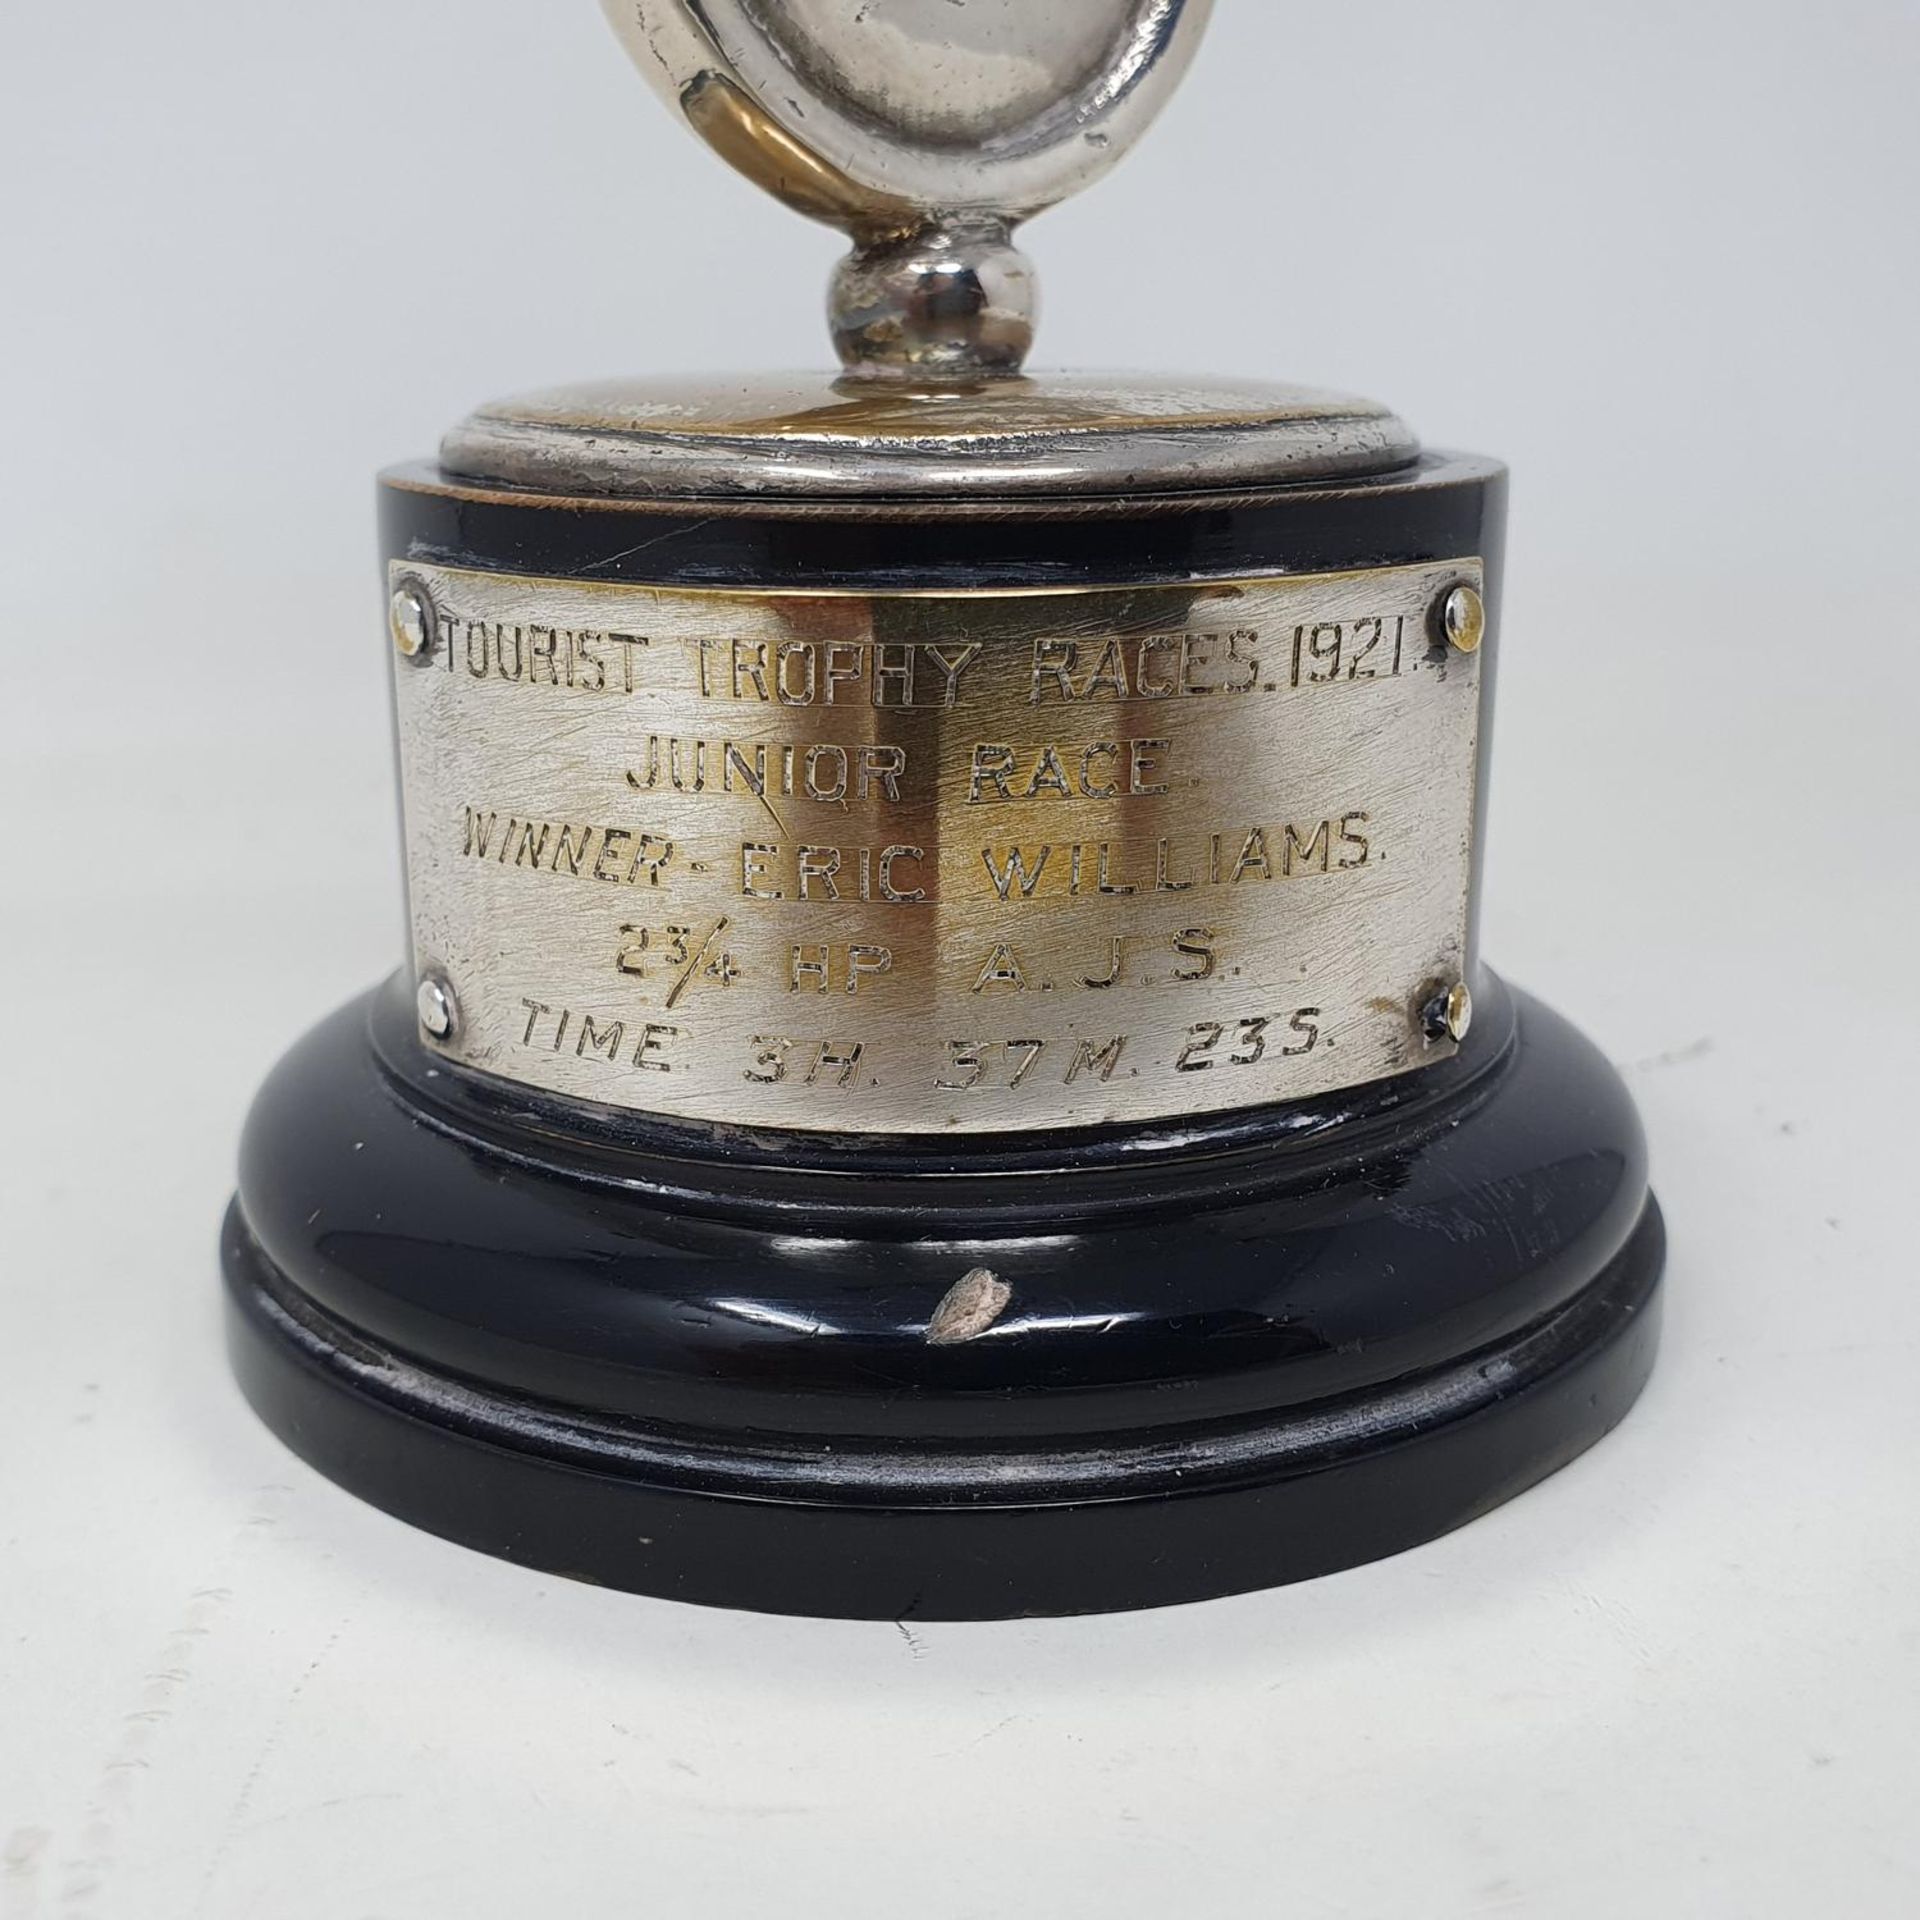 An Isle of Man TT silver replica trophy, the plaque inscribed 'TOURIST TROPHY RACES 1921 JUNIOR RACE - Image 4 of 4